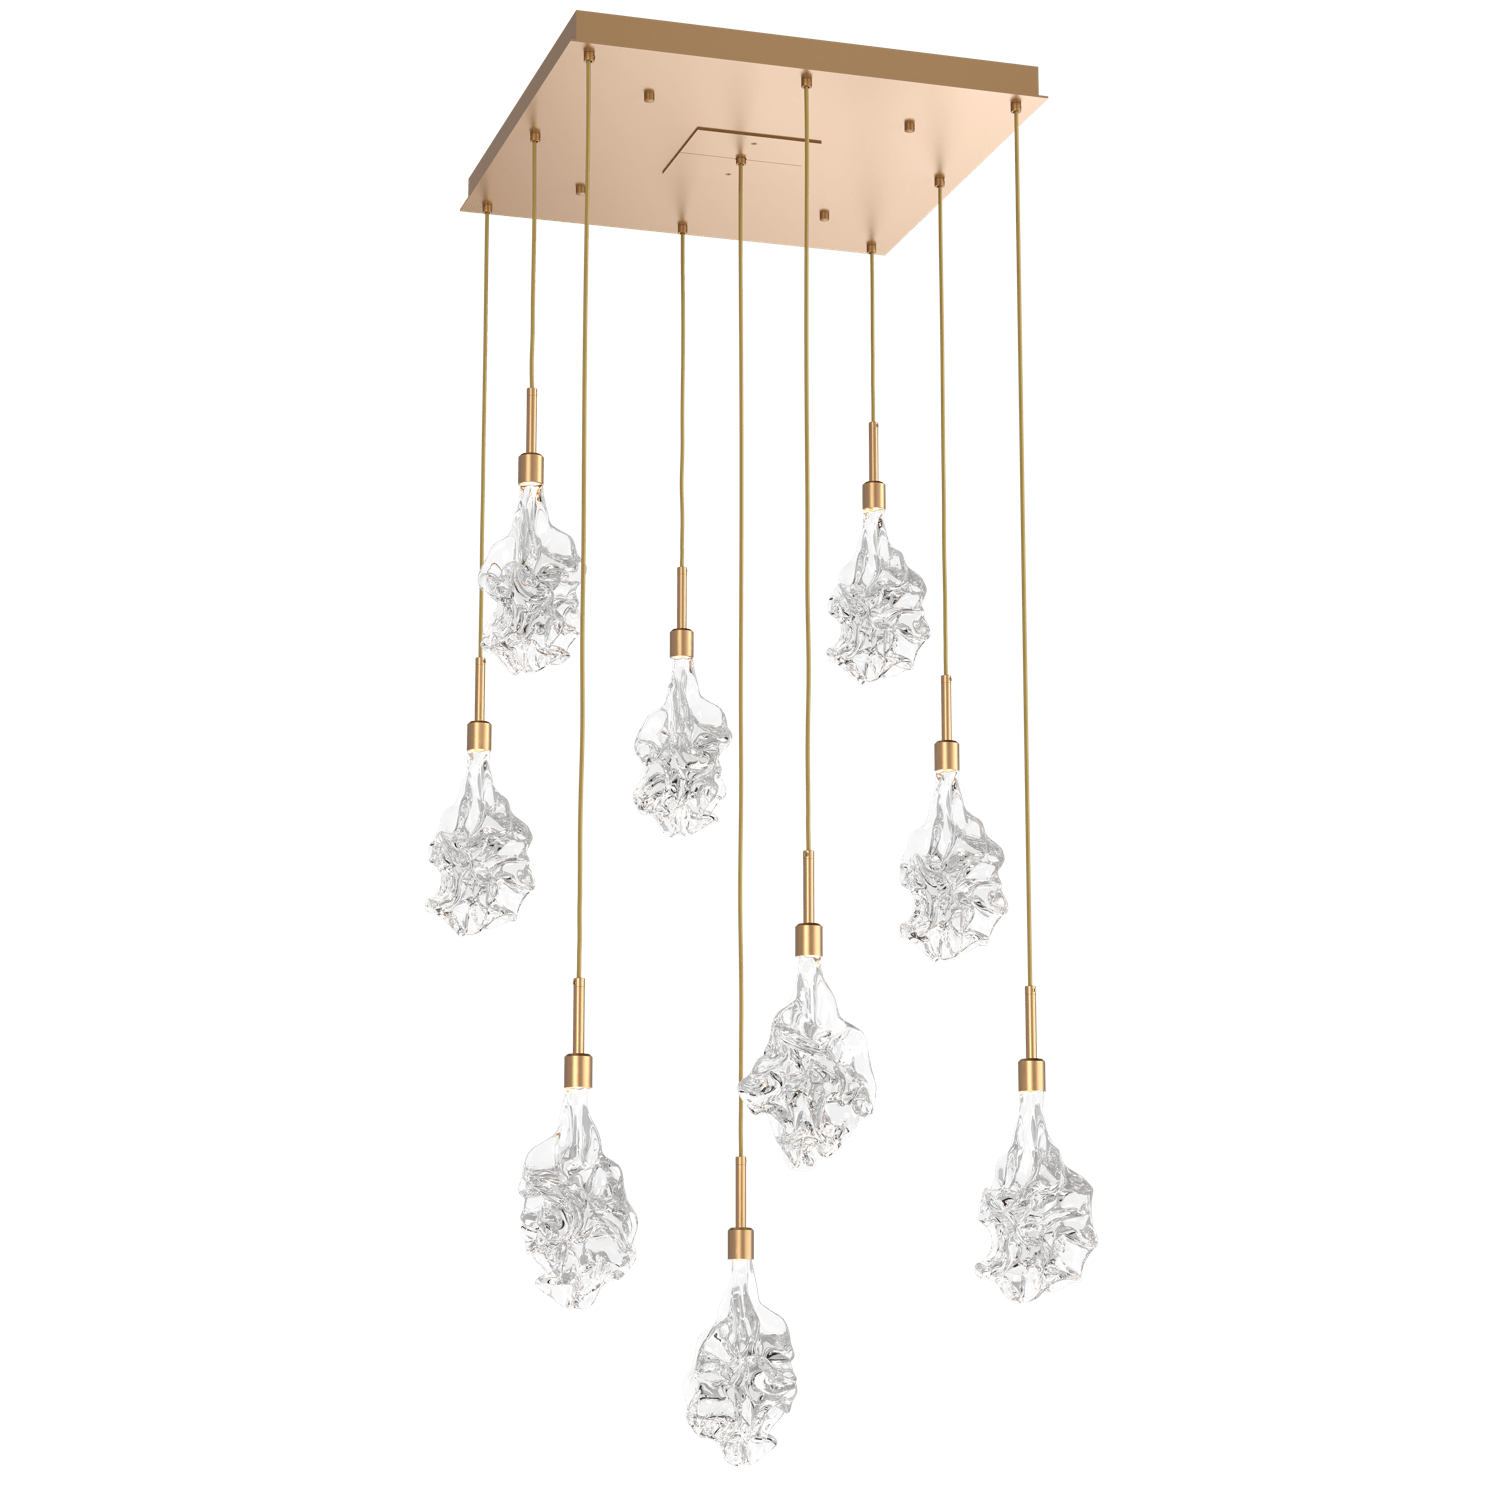 CHB0059-09-NB-Hammerton-Studio-Blossom-9-light-square-pendant-chandelier-with-novel-brass-finish-and-clear-handblown-crystal-glass-shades-and-LED-lamping